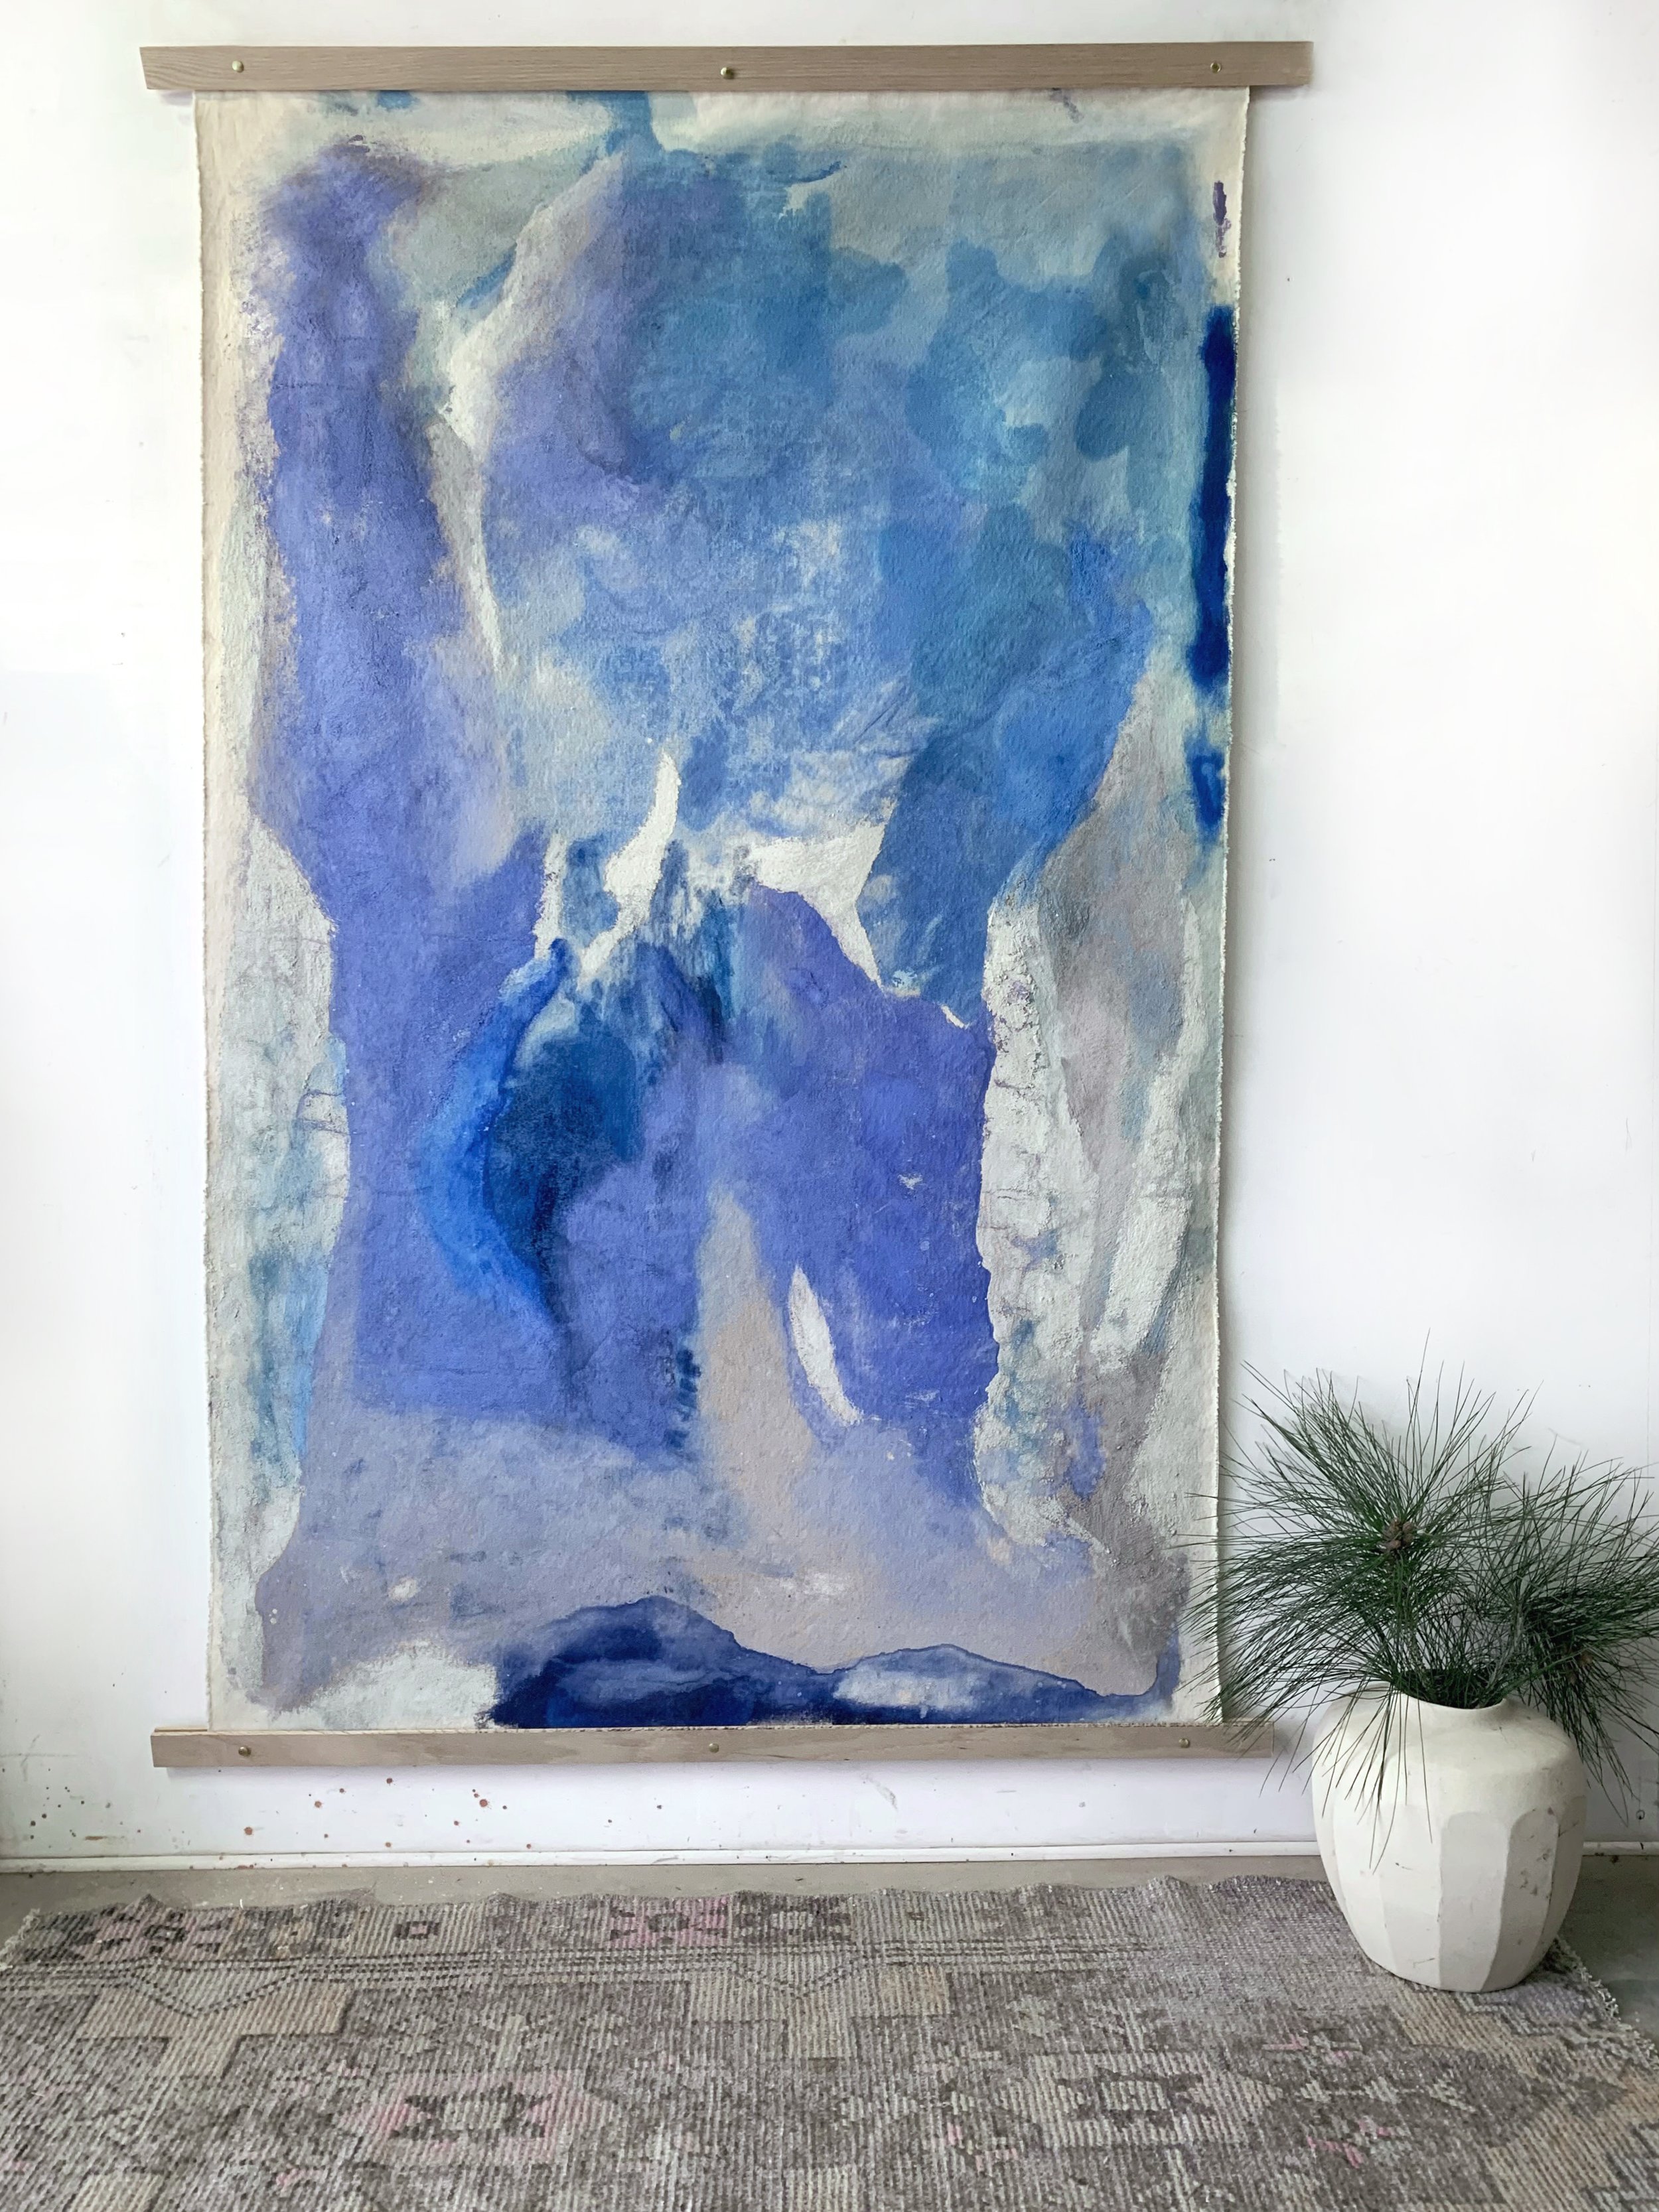   Blue Notes,   45” x 72” 2018, earth pigments and dyes on raw canvas with oak tapestry frame  